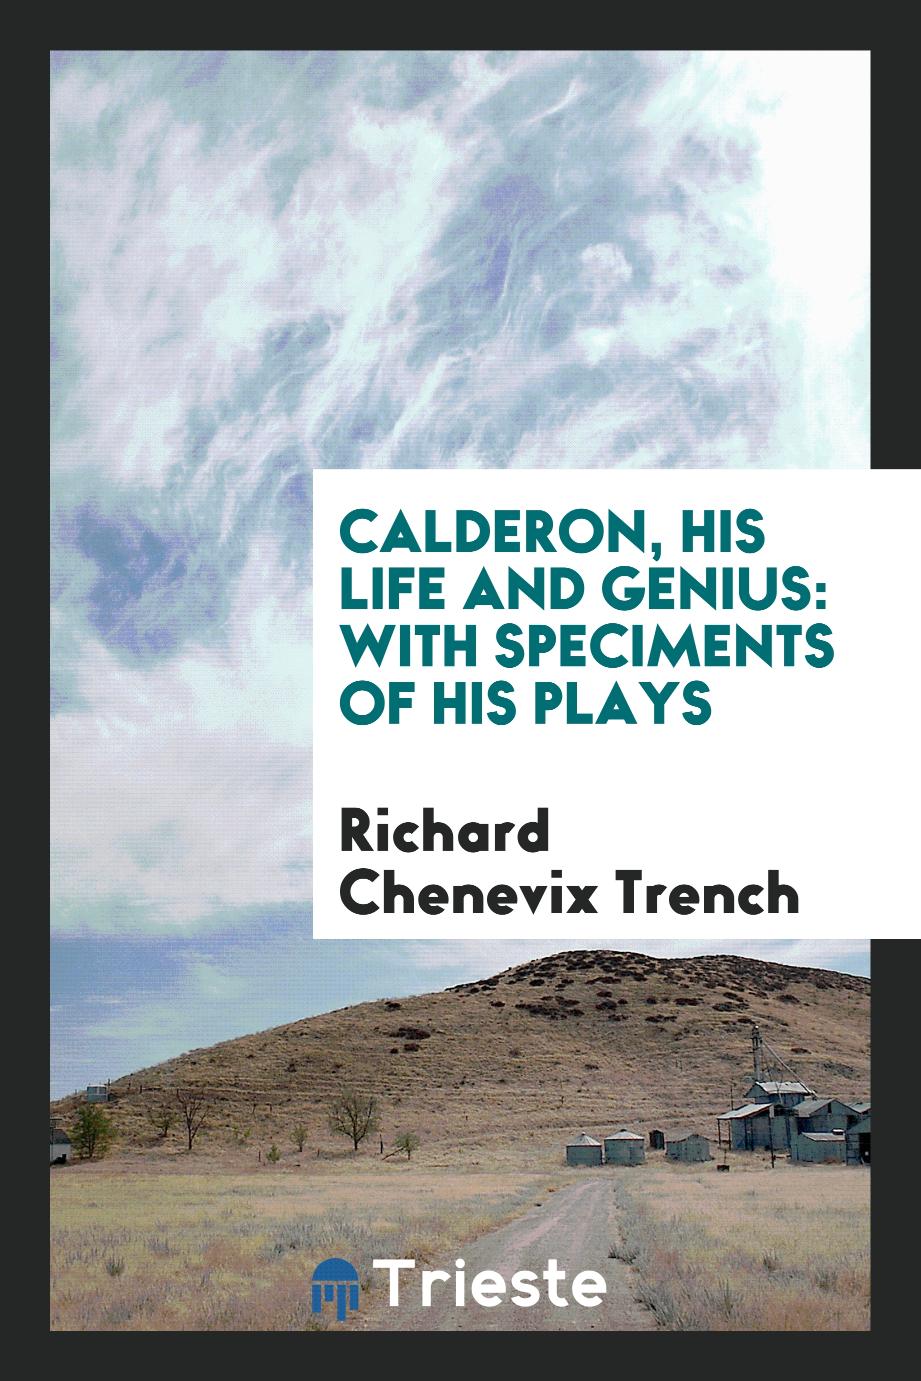 Calderon, his life and genius: with speciments of his plays